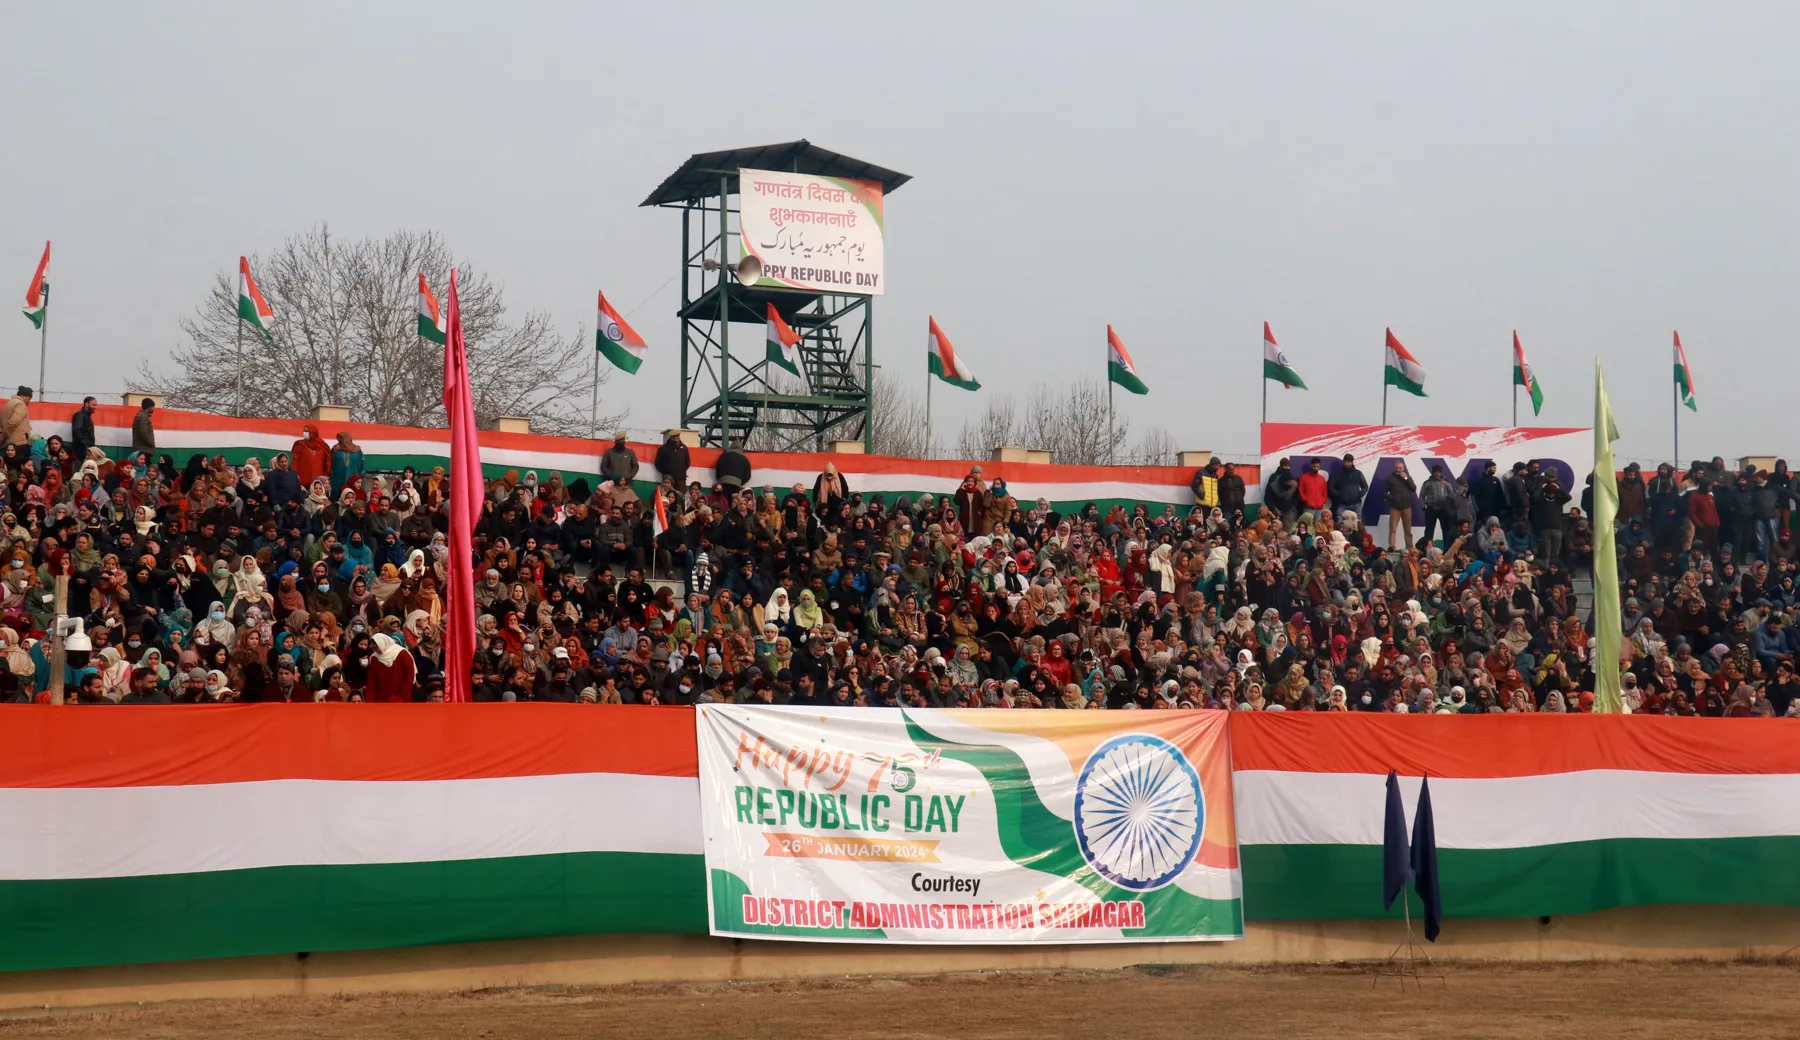 A large crowd watches the Republic Day parade at Bakshi stadium in Srinagar on Friday. Mubashir Khan for Greater Kashmir